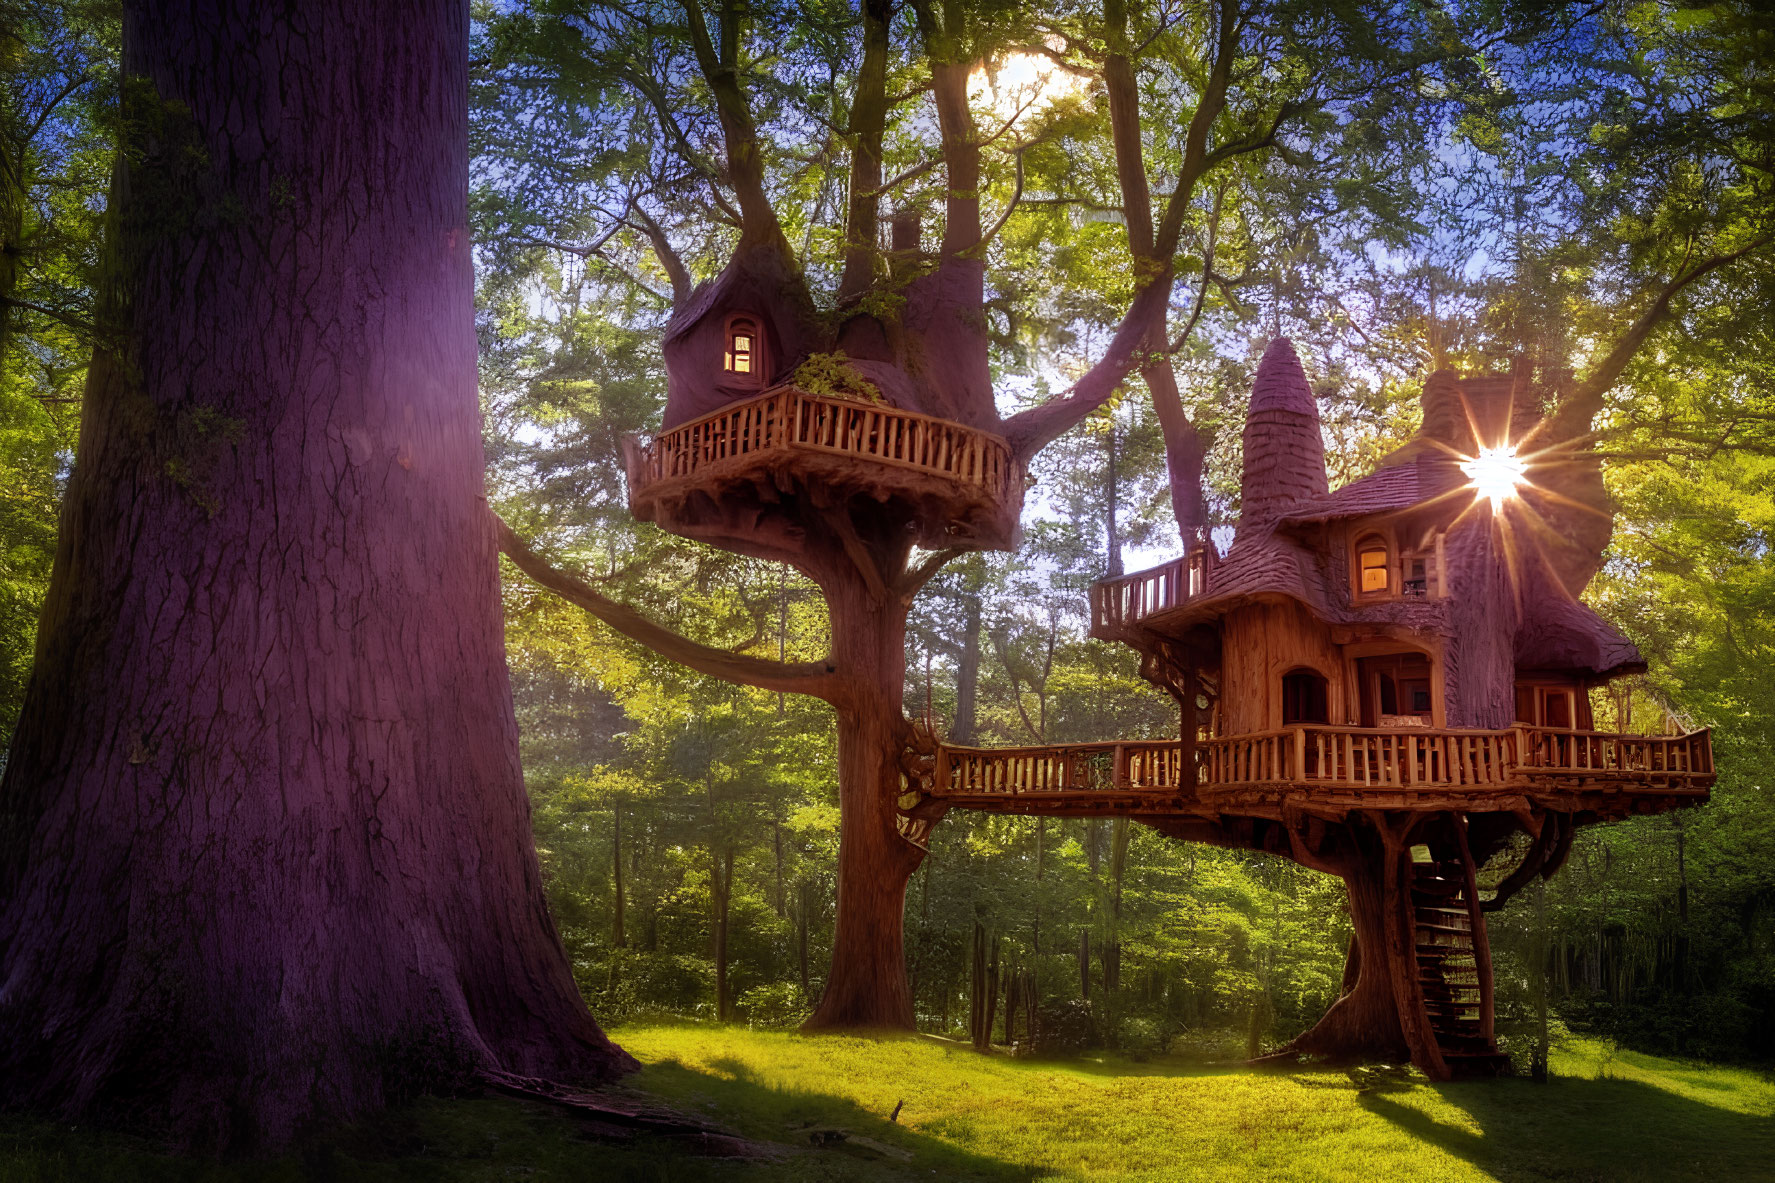 Sunlit Forest Treehouse with Wooden Staircase